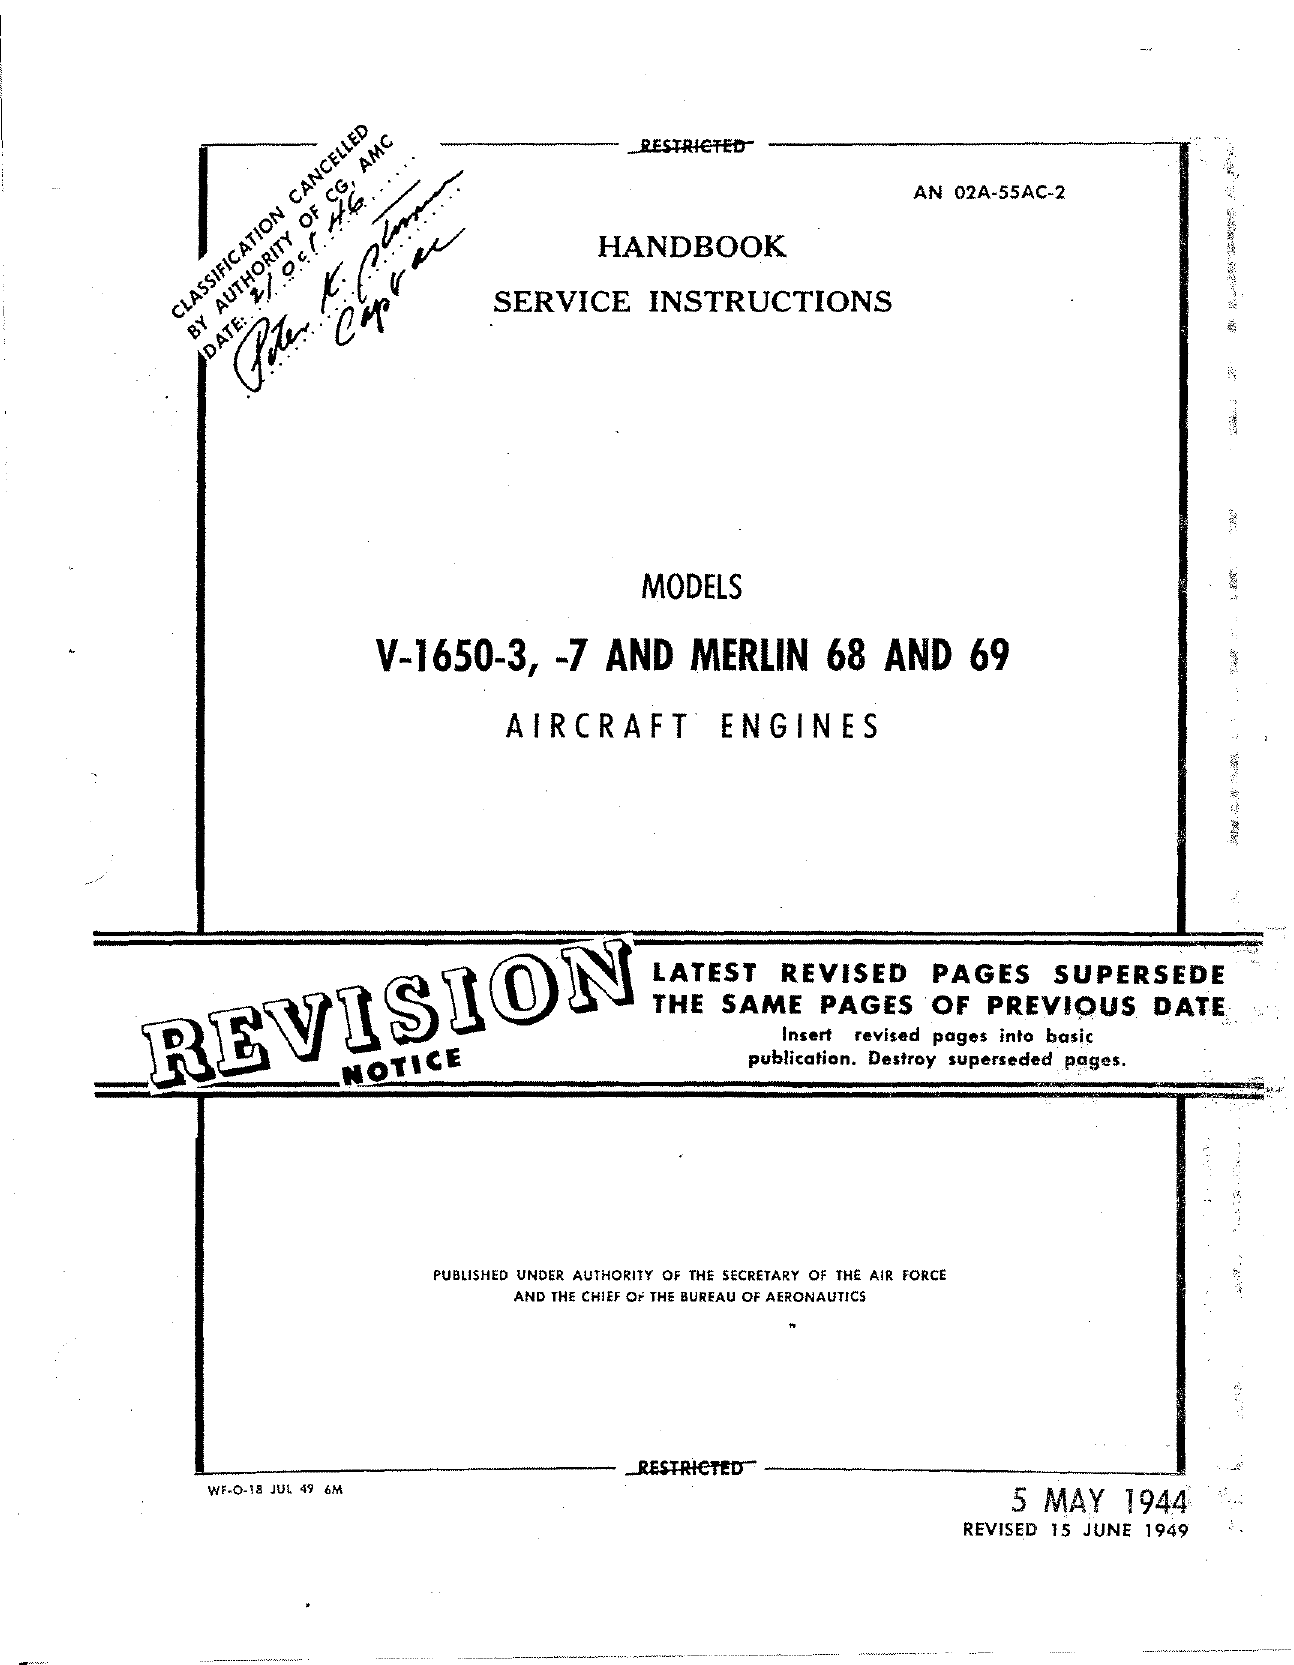 Sample page 1 from AirCorps Library document: Service Instructions for Models V-1650-3, -7, and Merlin 68 and 69 Aircraft Engines